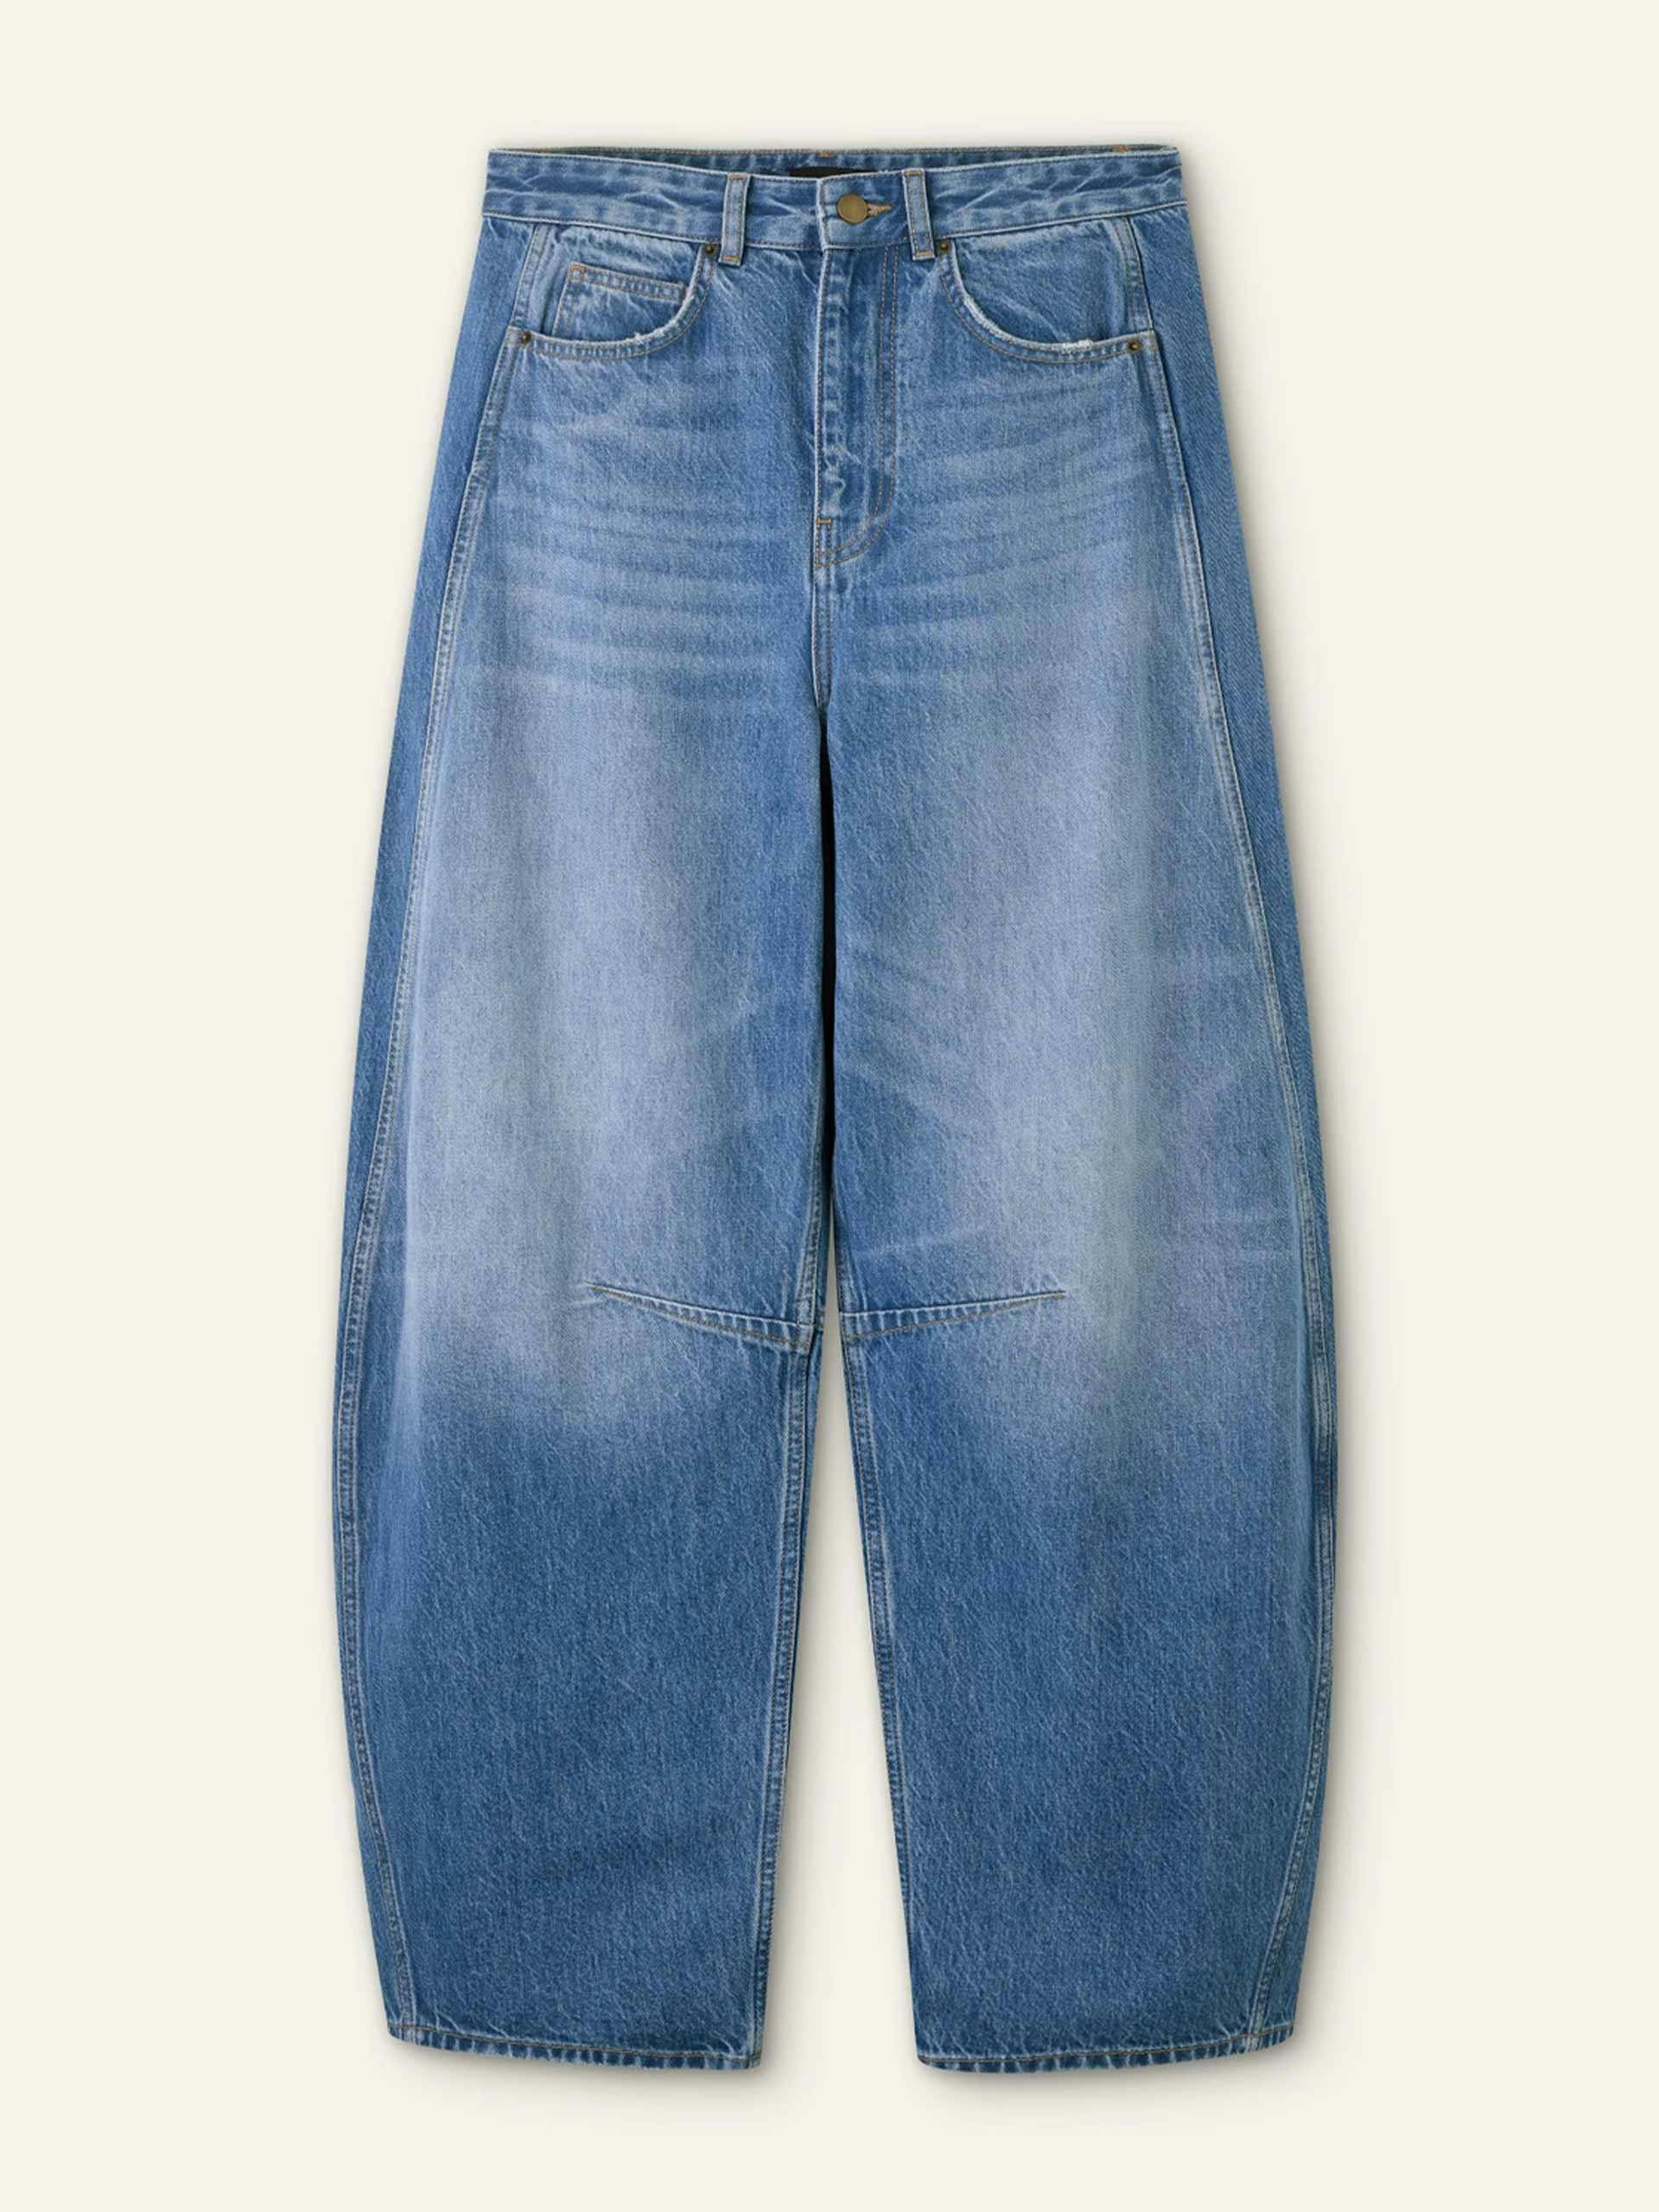 Authentic denim extreme tapered jeans